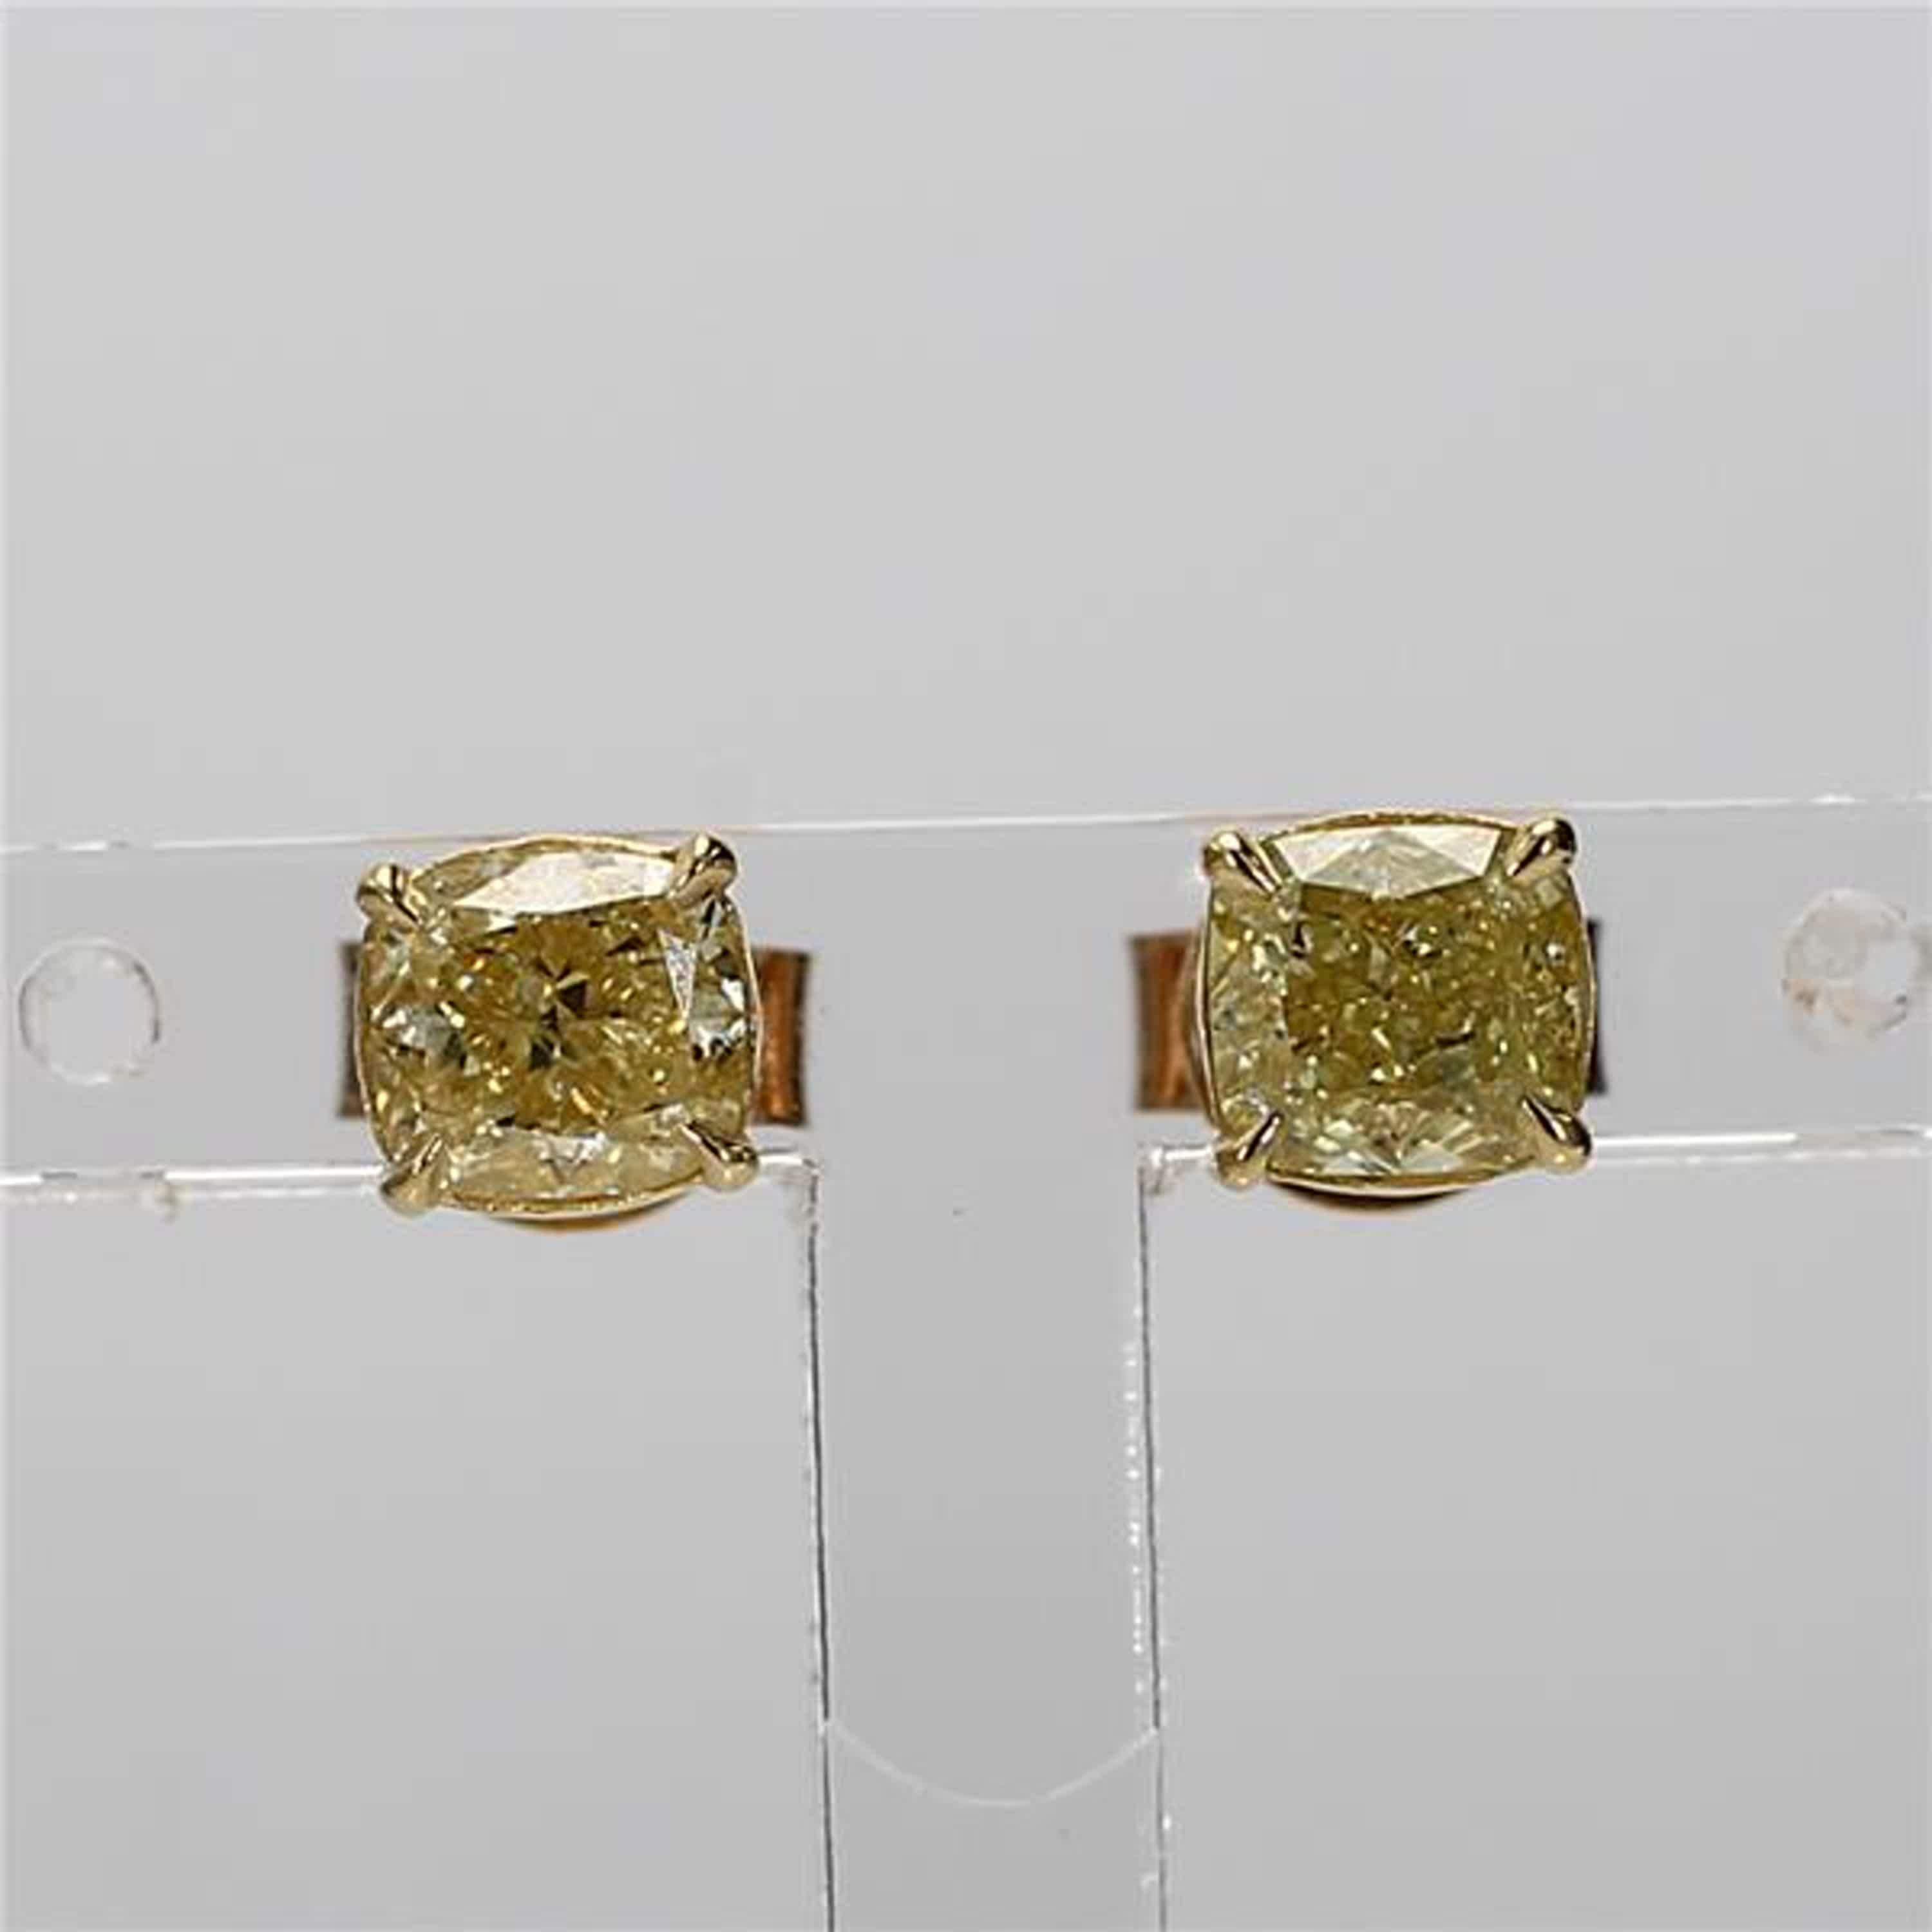 RareGemWorld's classic GIA certified diamond earrings. Mounted in a beautiful 14K Yellow Gold setting with natural cushion cut yellow diamonds. These earrings are guaranteed to impress and enhance your personal collection!

Total Weight: